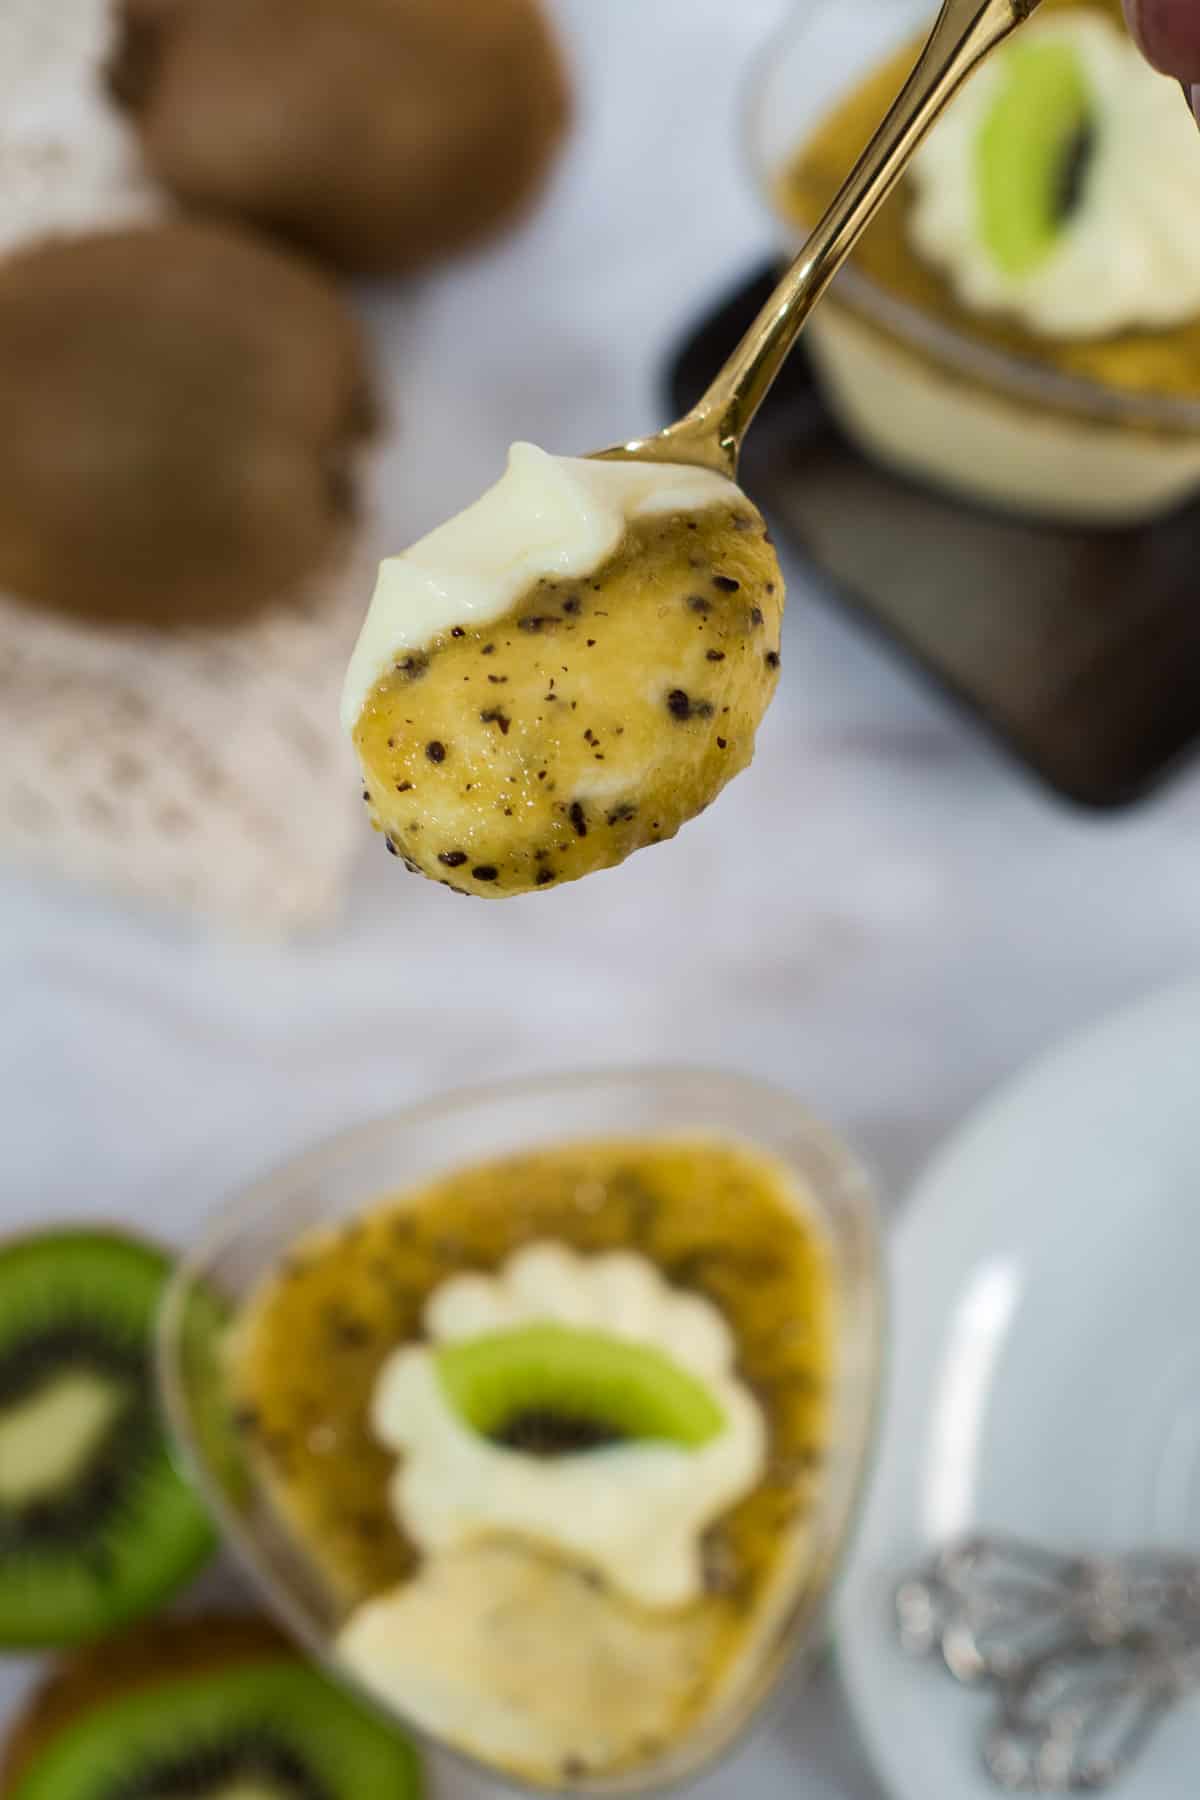 A scoop of kiwi mousse in a small spoon.